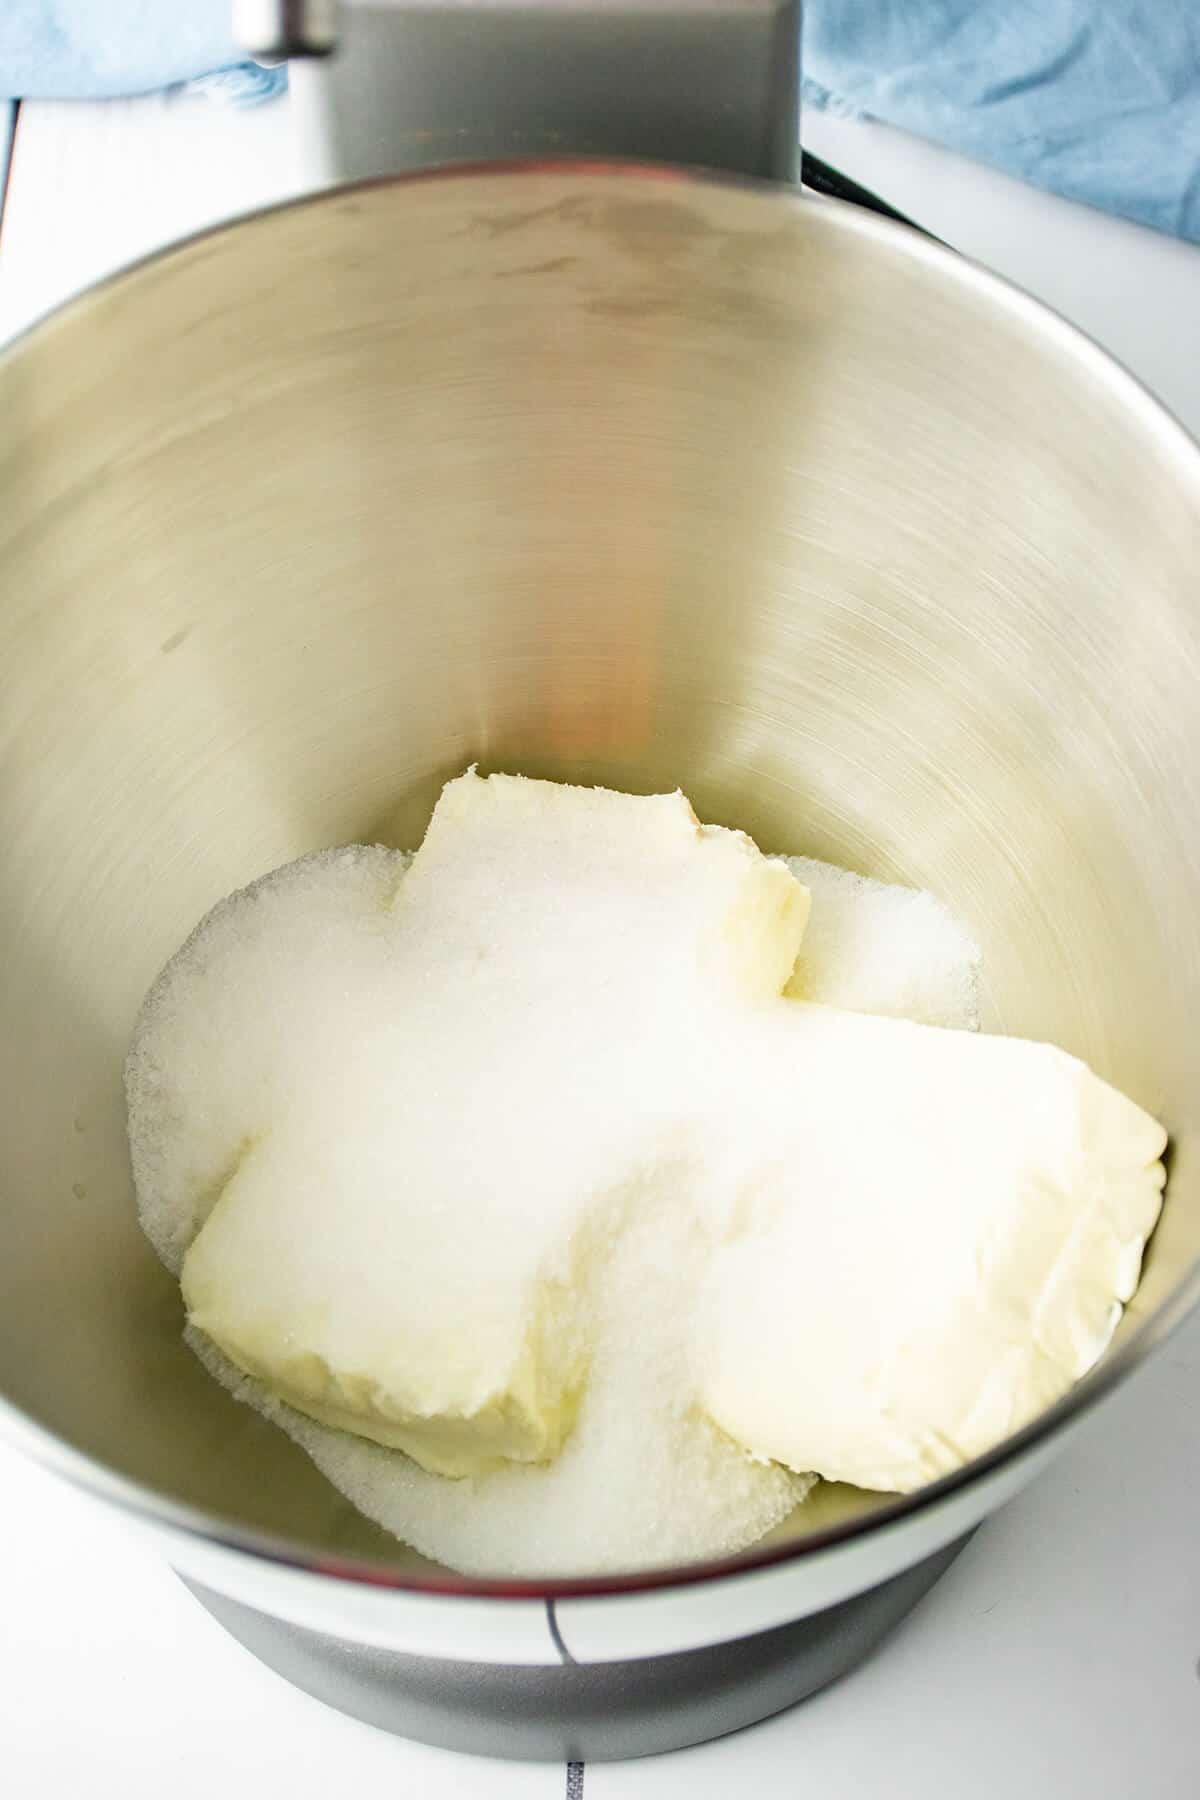 Cream cheese and sugar in a mixing bowl.